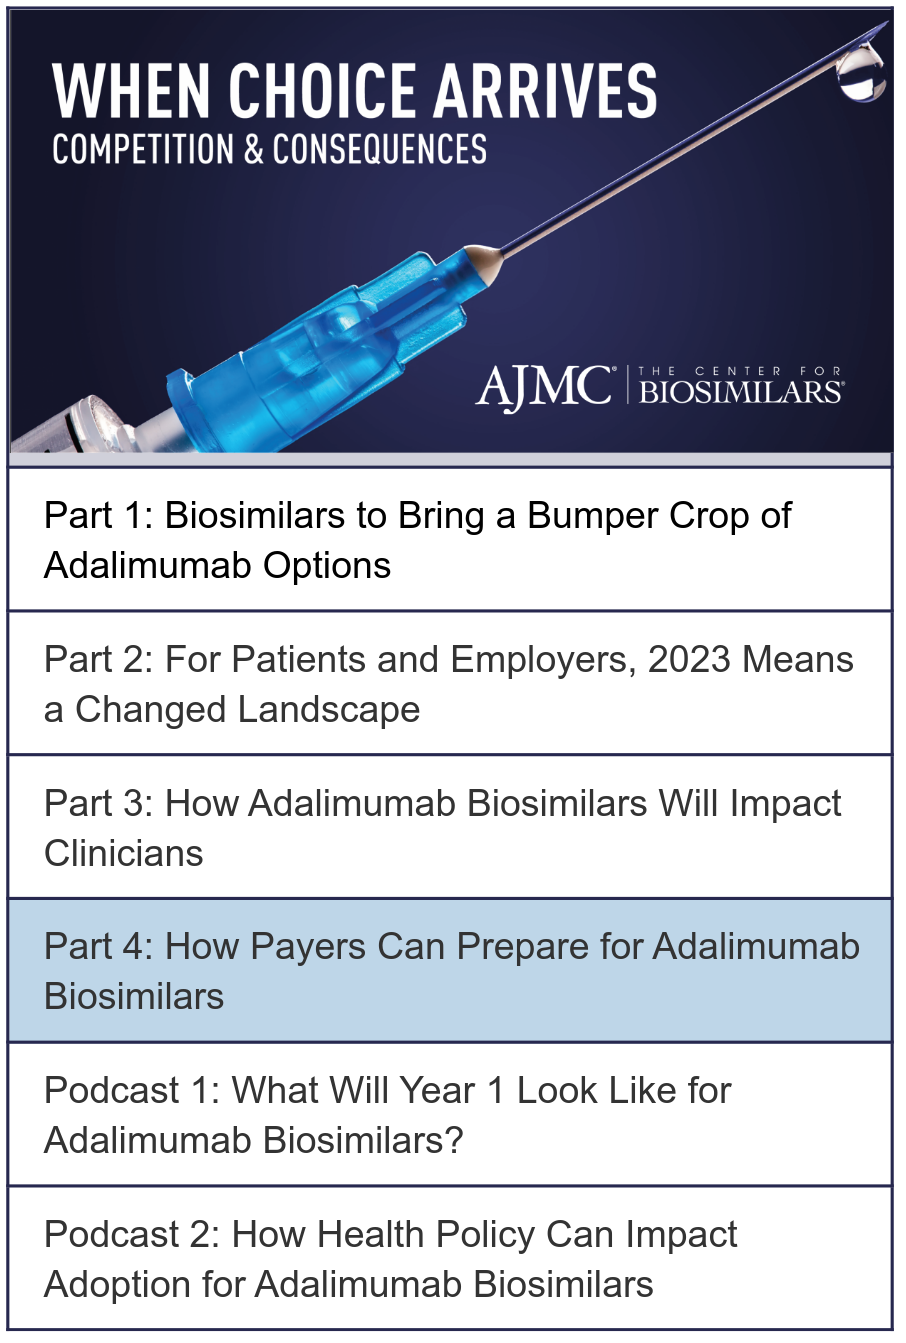 "When Choice Arrives: Competition & Consequences" written over a bright blue syringe with the AJMC/The Center for Biosimilars logo in the bottom right corner. Under the image is a list of 6 items (4 article titles and 2 podcasts). The fourth article item is highlighted.